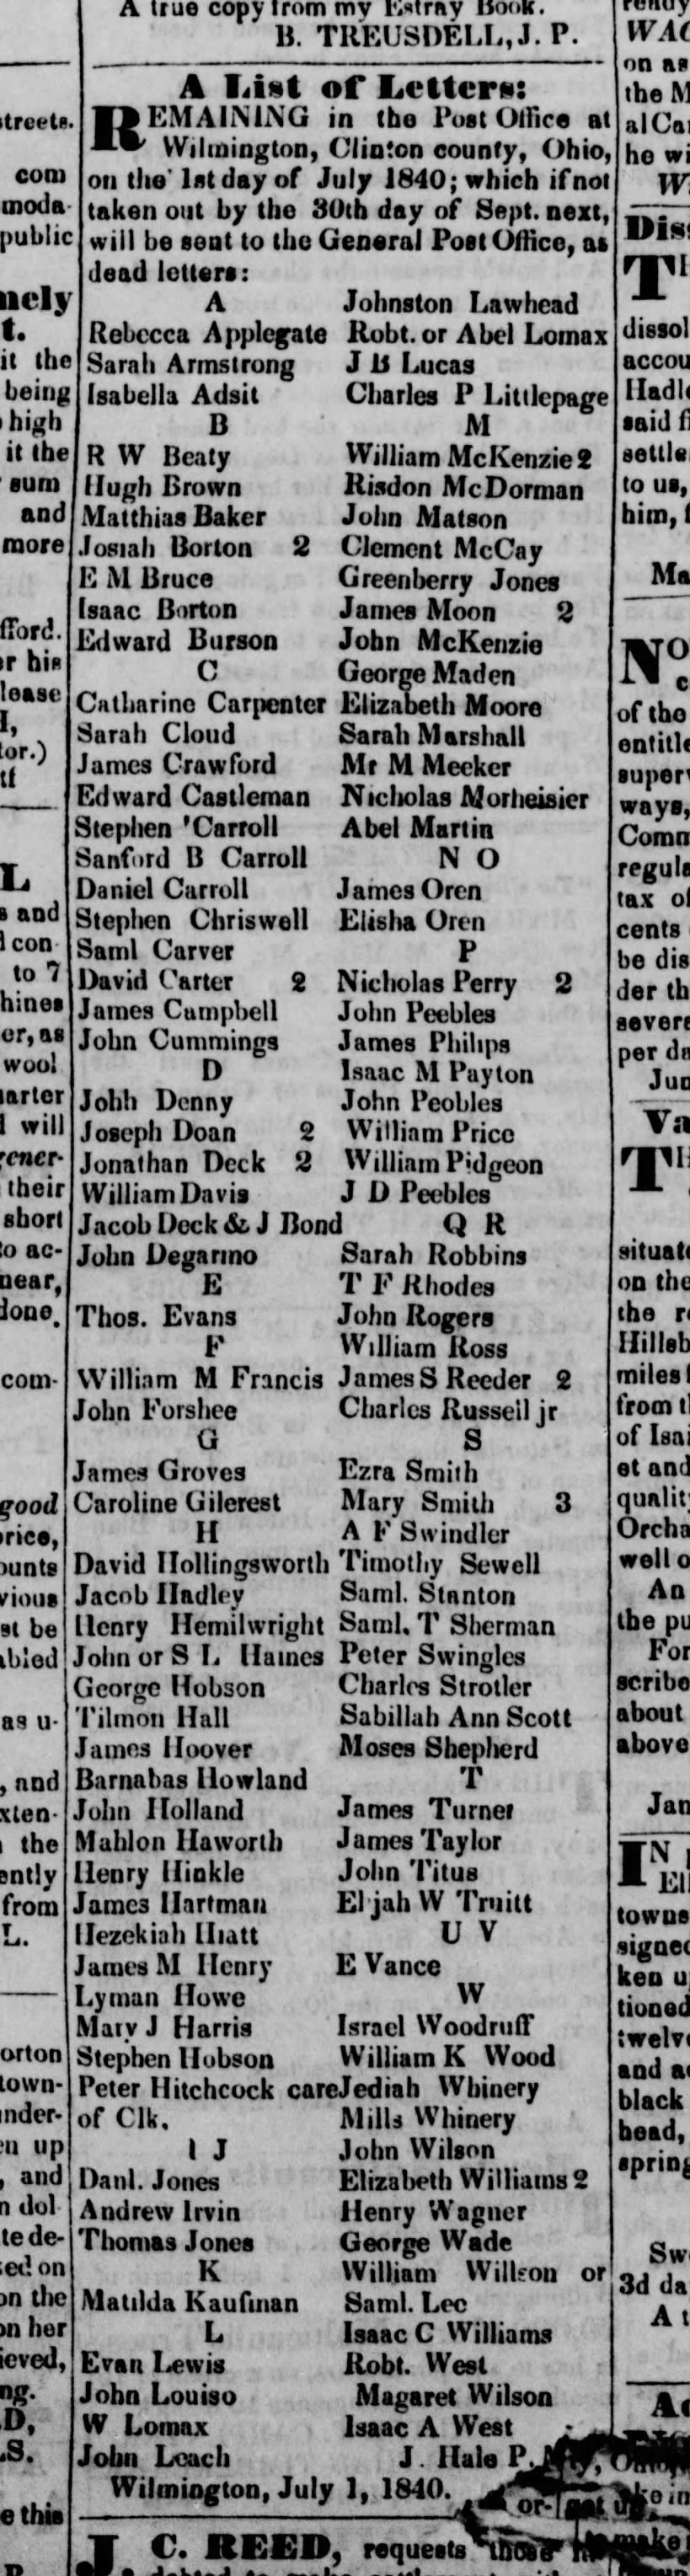 Democrat and Herald (Wilmington, Ohio, 28 August 1849, Page 4: List of letters at post office at Wil